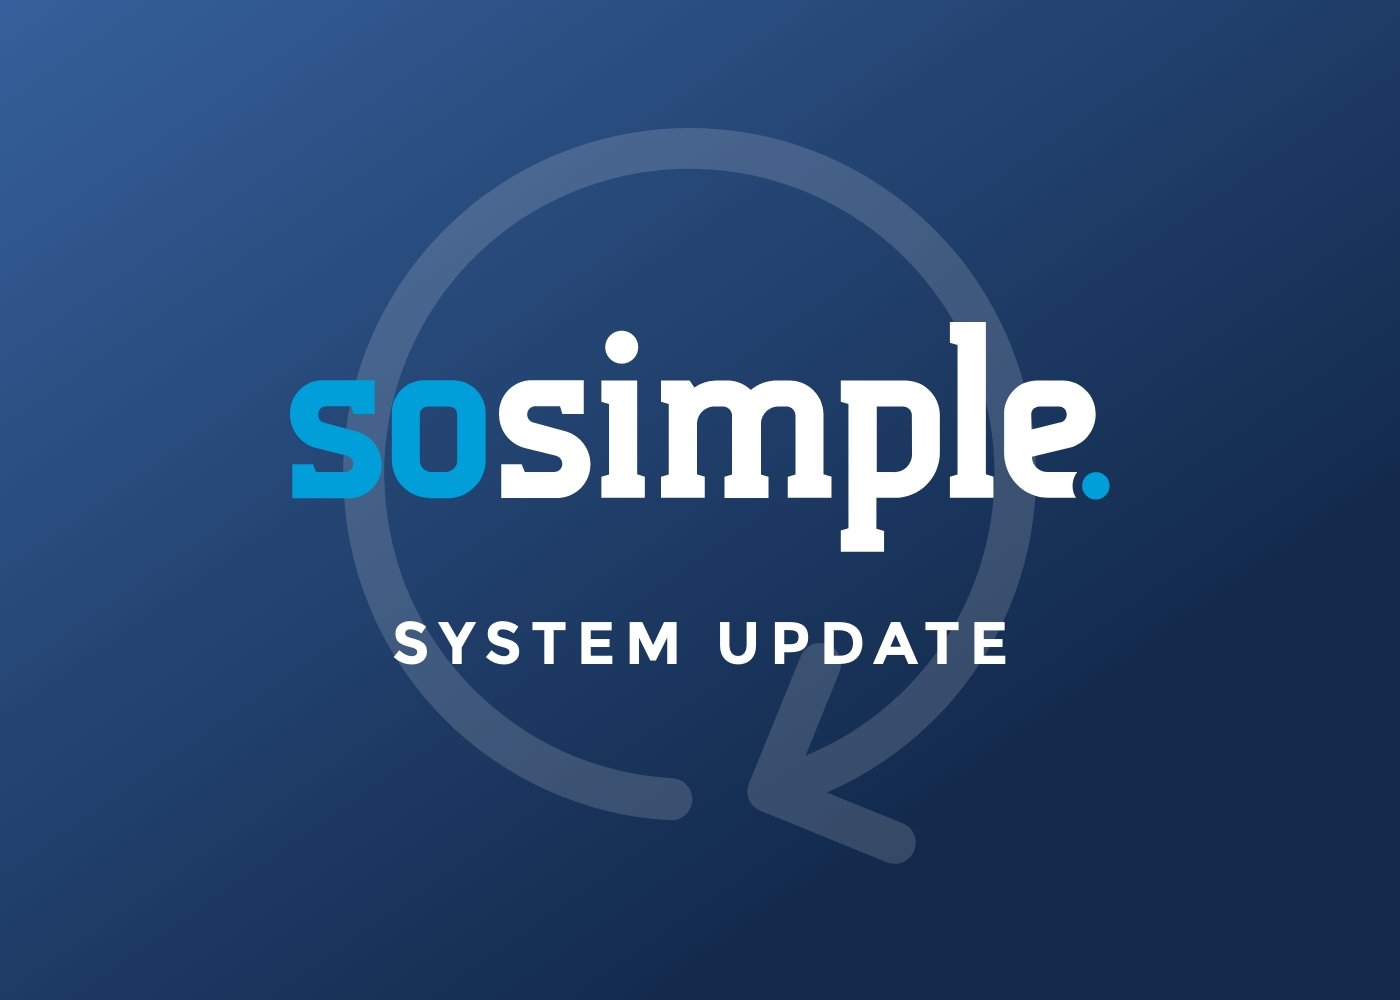 SoSimple Marketing+ Updates: NEW Marketing+ Dashboard & Quick Links Features and Interface Updates